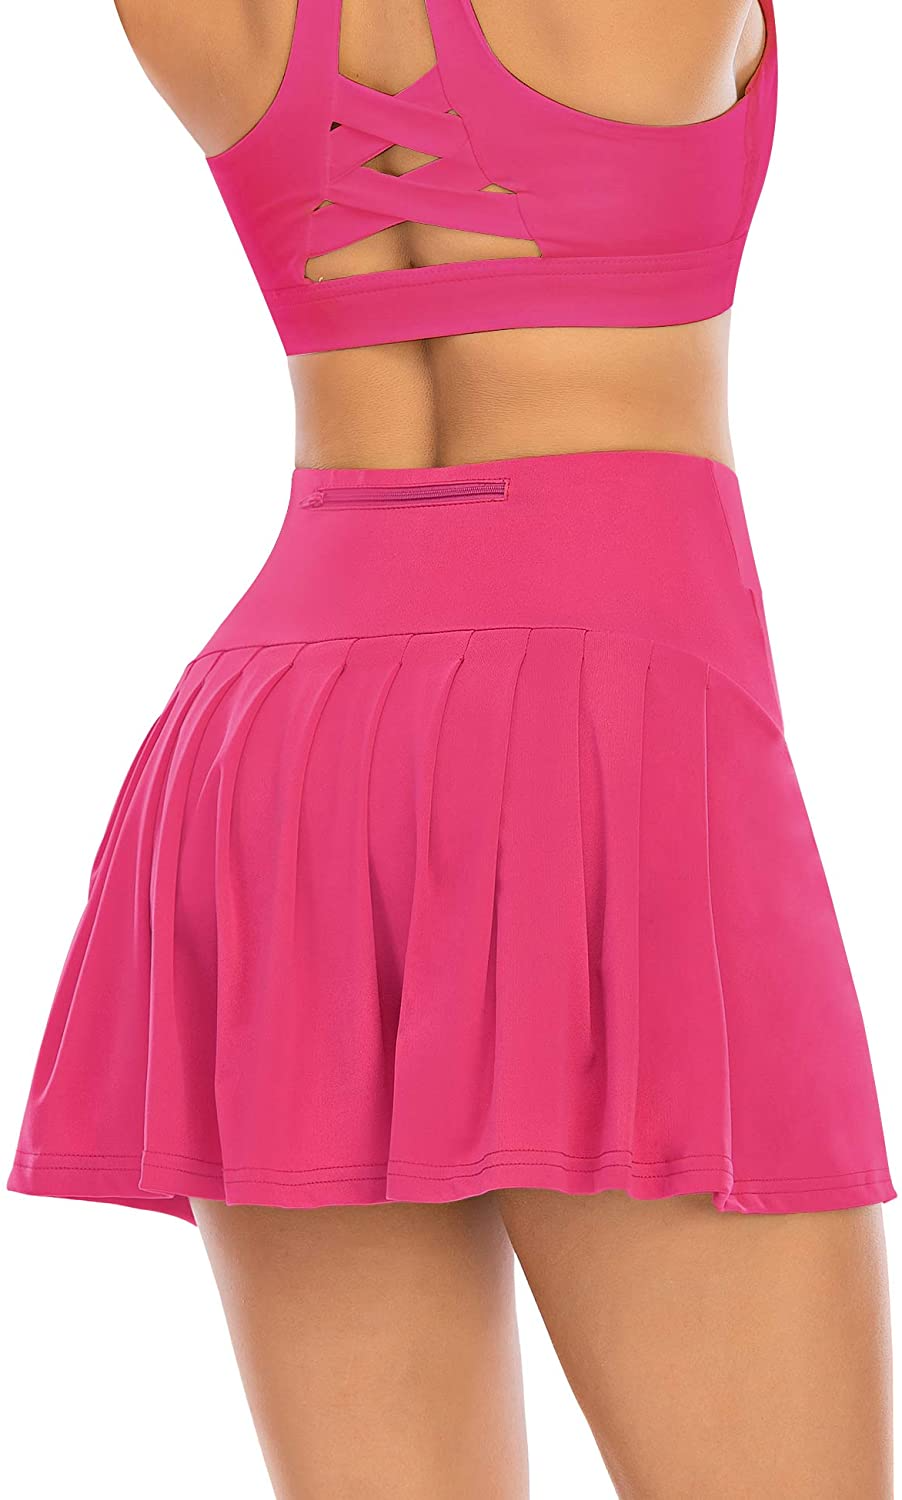 Fitfro® Athletic Sports Skorts Activewear Running Workout Skirt